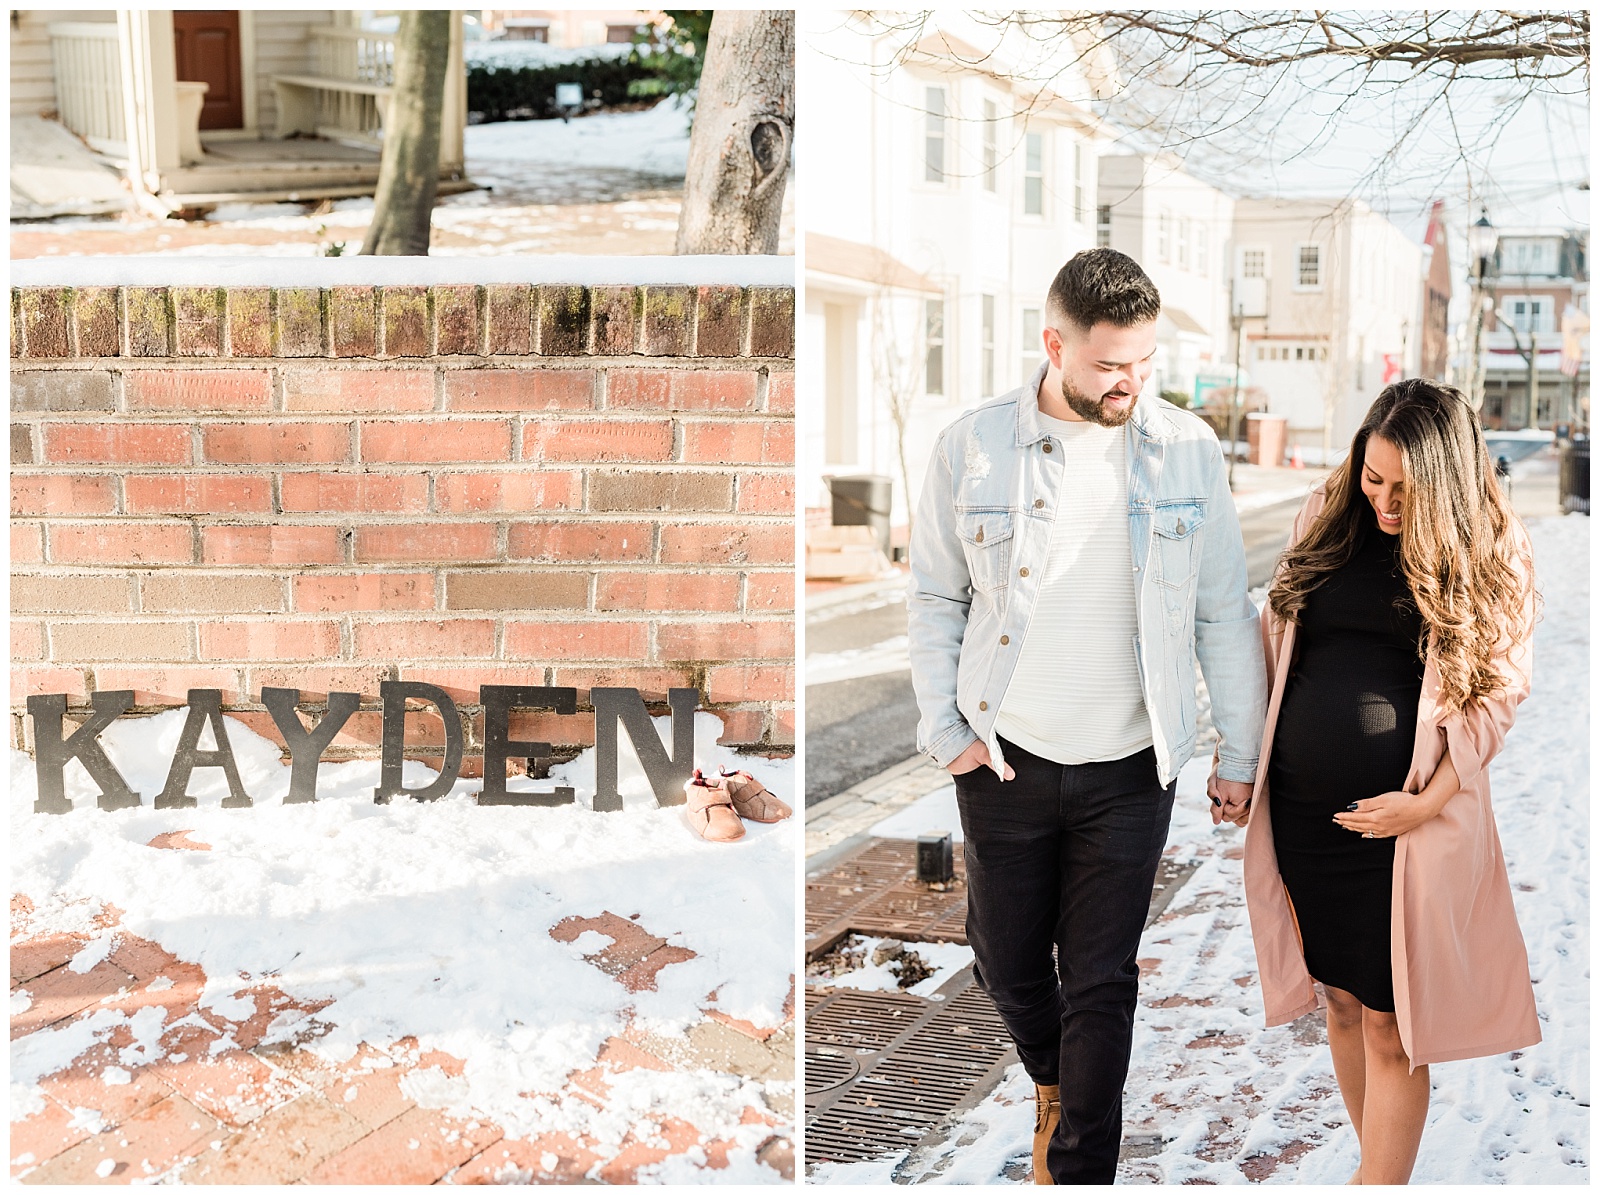 Maternity Session, Family, Baby, New Parents, Maternity Shoot, Pregnant, Pregnancy Photos, New Jersey, Photographer, Haddonfield, NJ, Haddon Heights, Town, Snowy, Winter, name, kayden